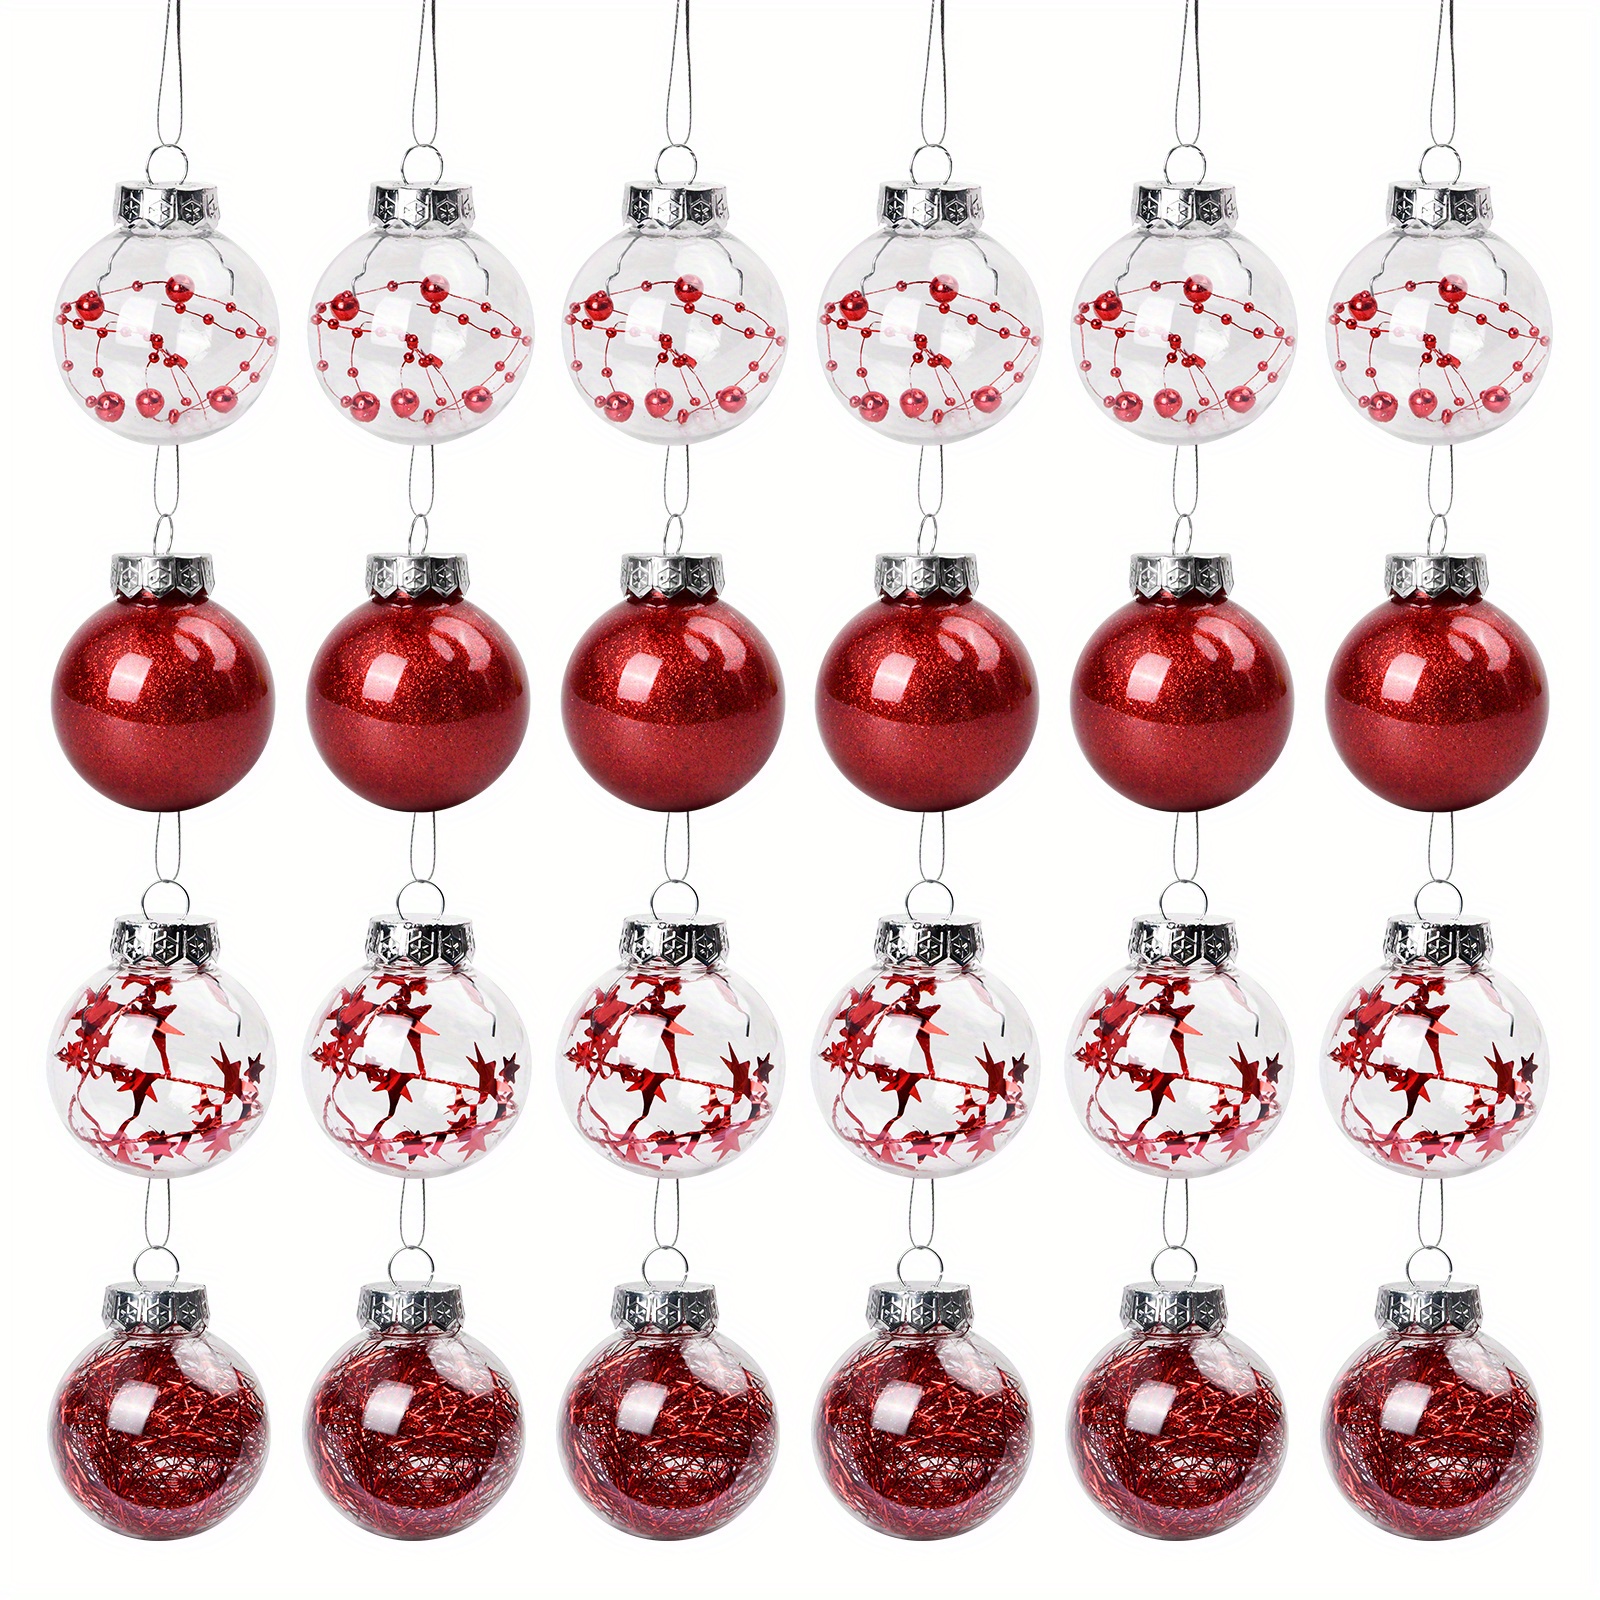  20 PCS Iridescent Christmas Ornaments Plastic Balls, 2.36 Inch  Clear Fillable Ball Ornaments Rainbow Balls, Hanging Baubles Ornaments for Christmas  Tree DIY Party Decorations (60 mm) : Home & Kitchen